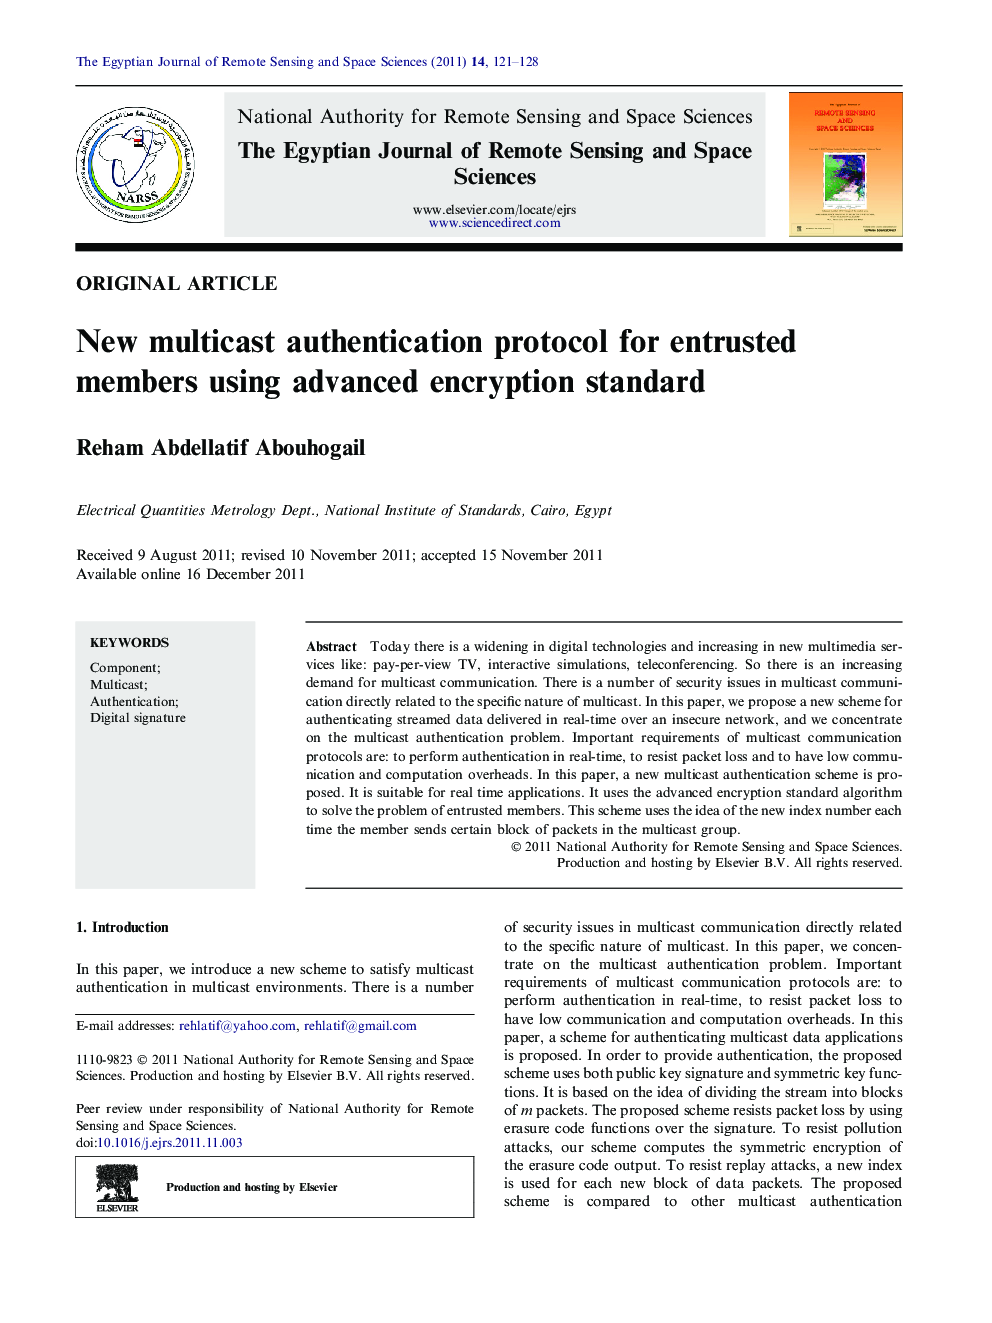 New multicast authentication protocol for entrusted members using advanced encryption standard